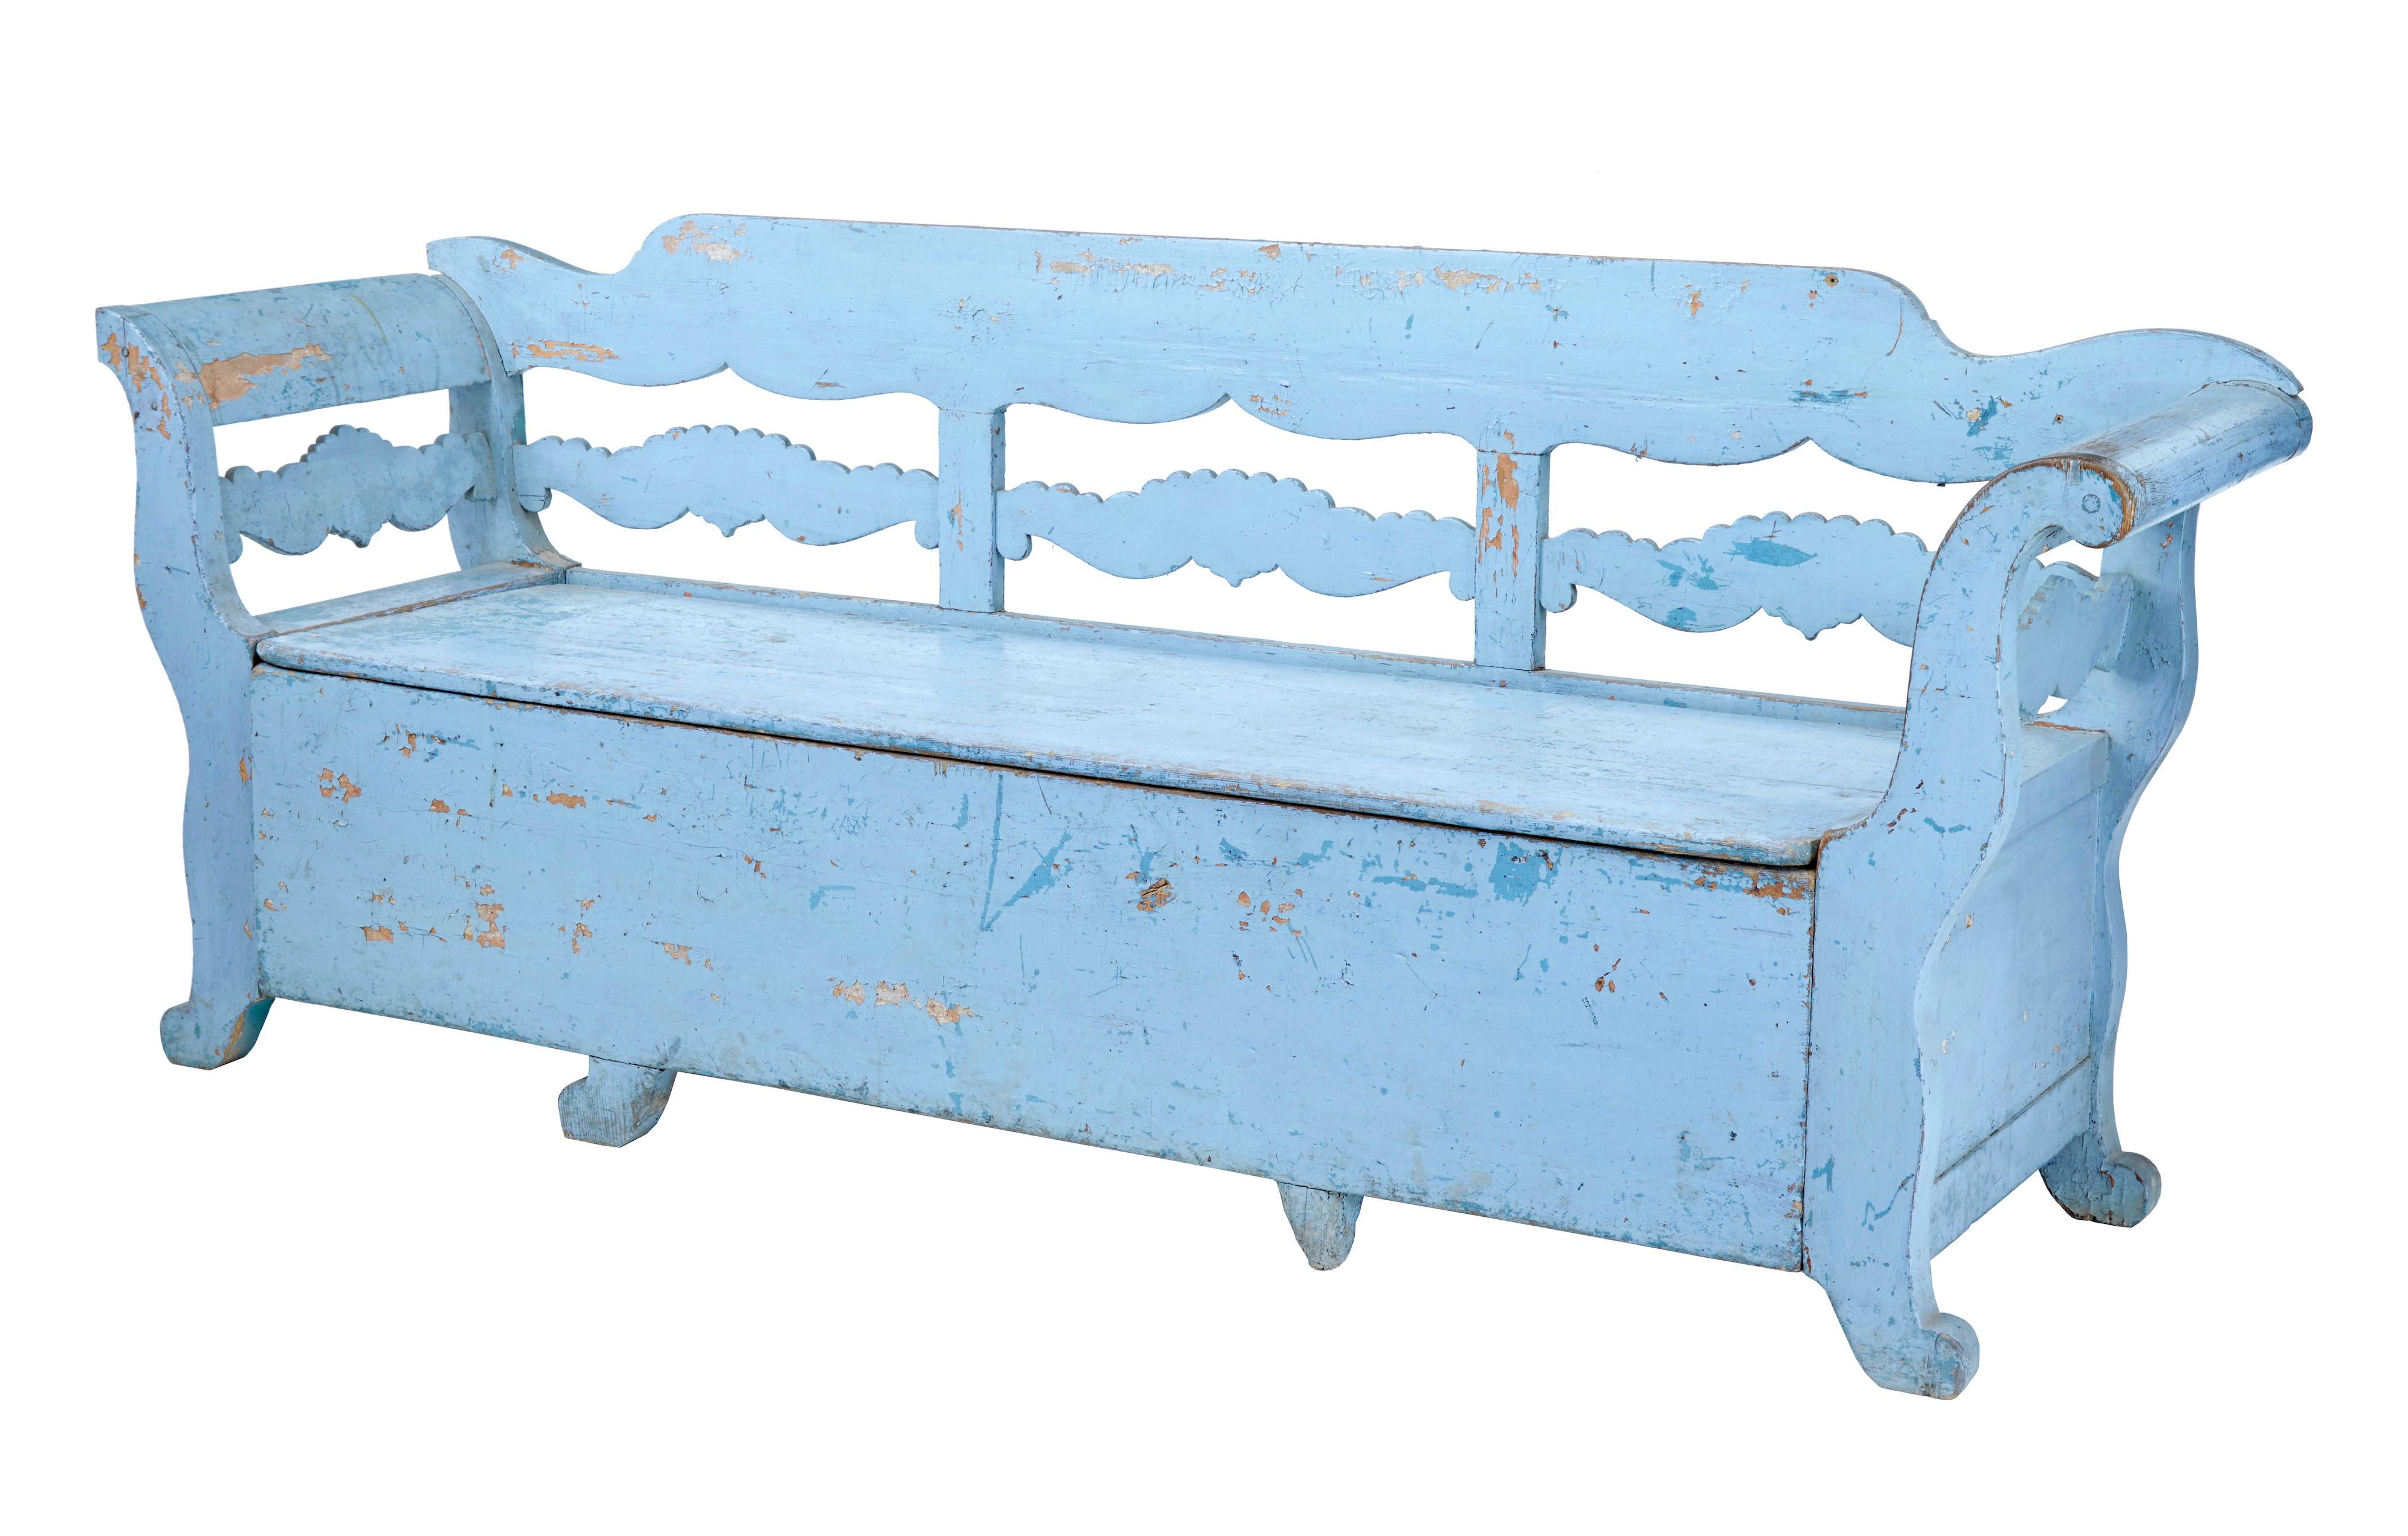 Large rustic Swedish pine bench / daybed, circa 1850.

Very heavy item. Ideal for a summer house or garden room. Lift up seat which allows the base to be pulled out to form a bed. N.B it no longer functions properly as a bed but is ideal storage